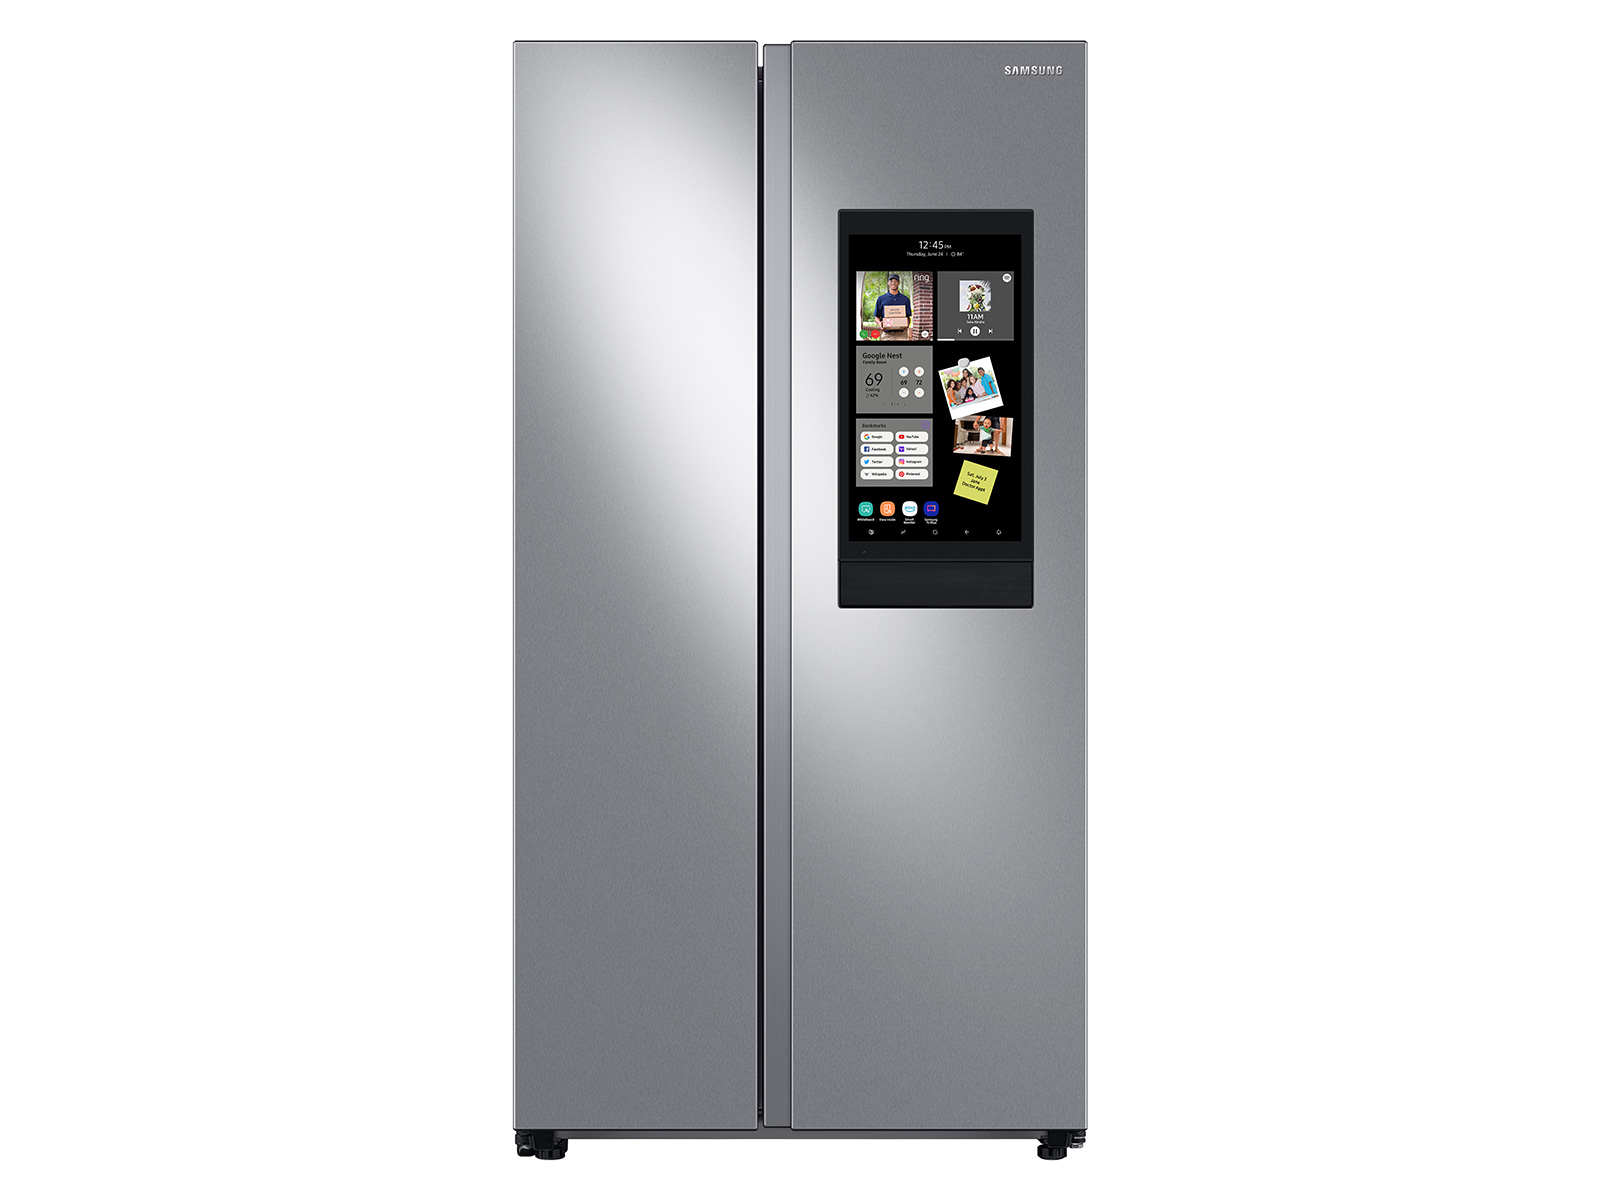 Photos - Fridge Samsung 27.3 cu. ft. Smart Side-by-Side Refrigerator with Family Hub™ in S 